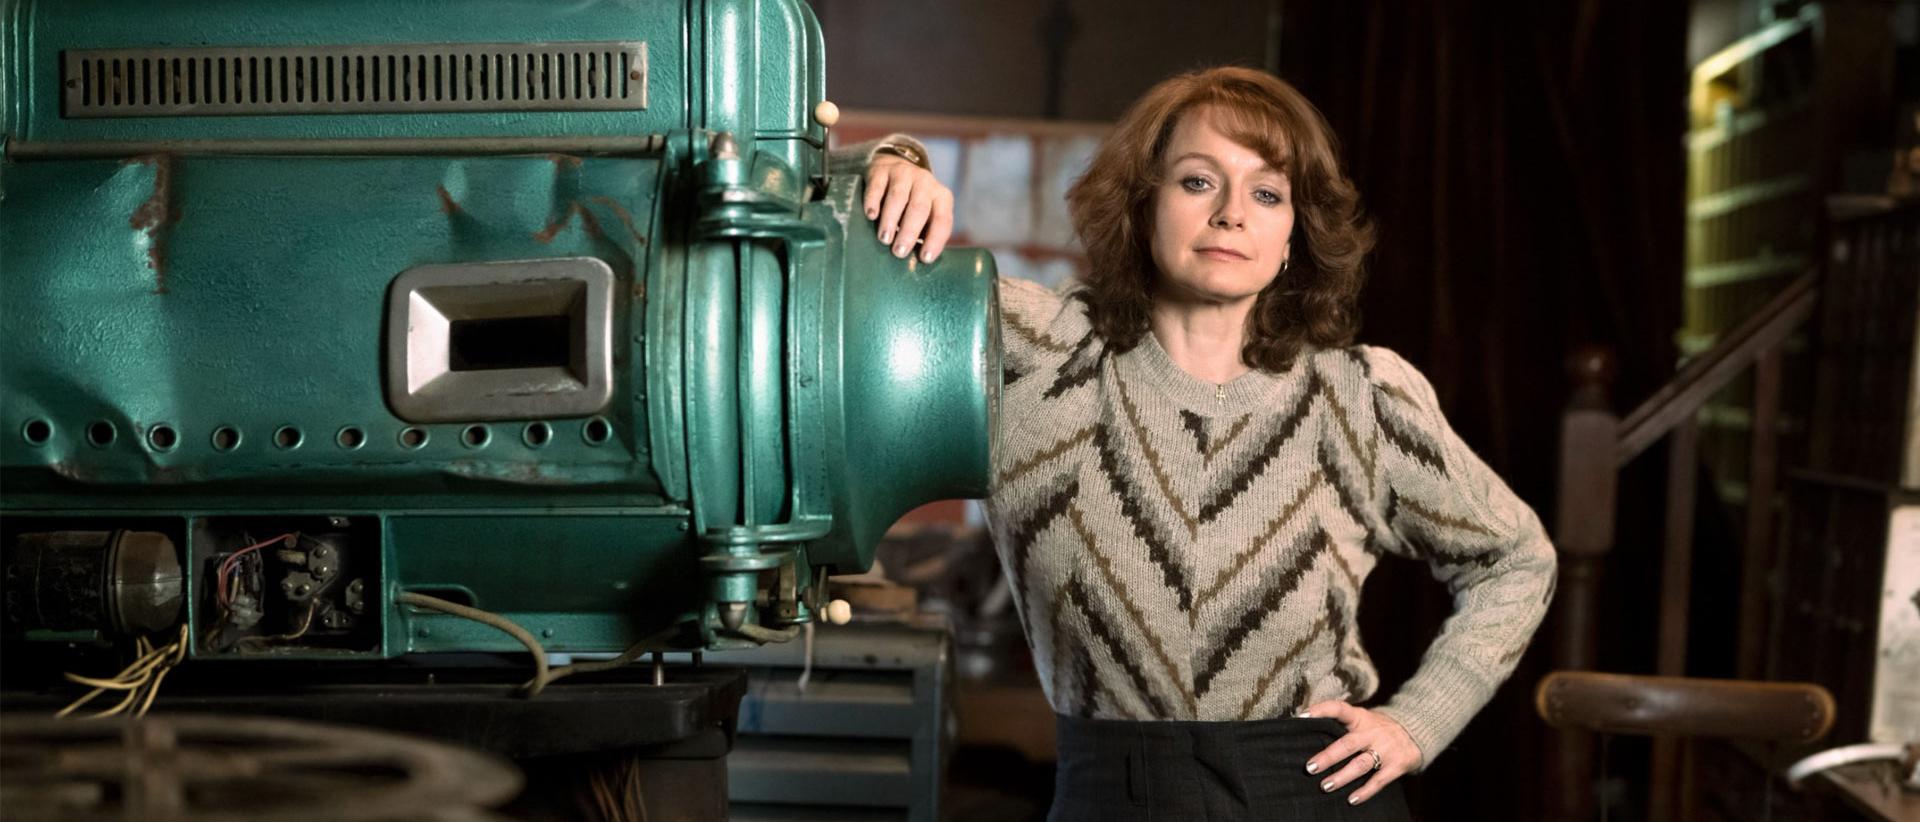 a still from save the cinema featuring samantha morton standing next to an old piece of machinery